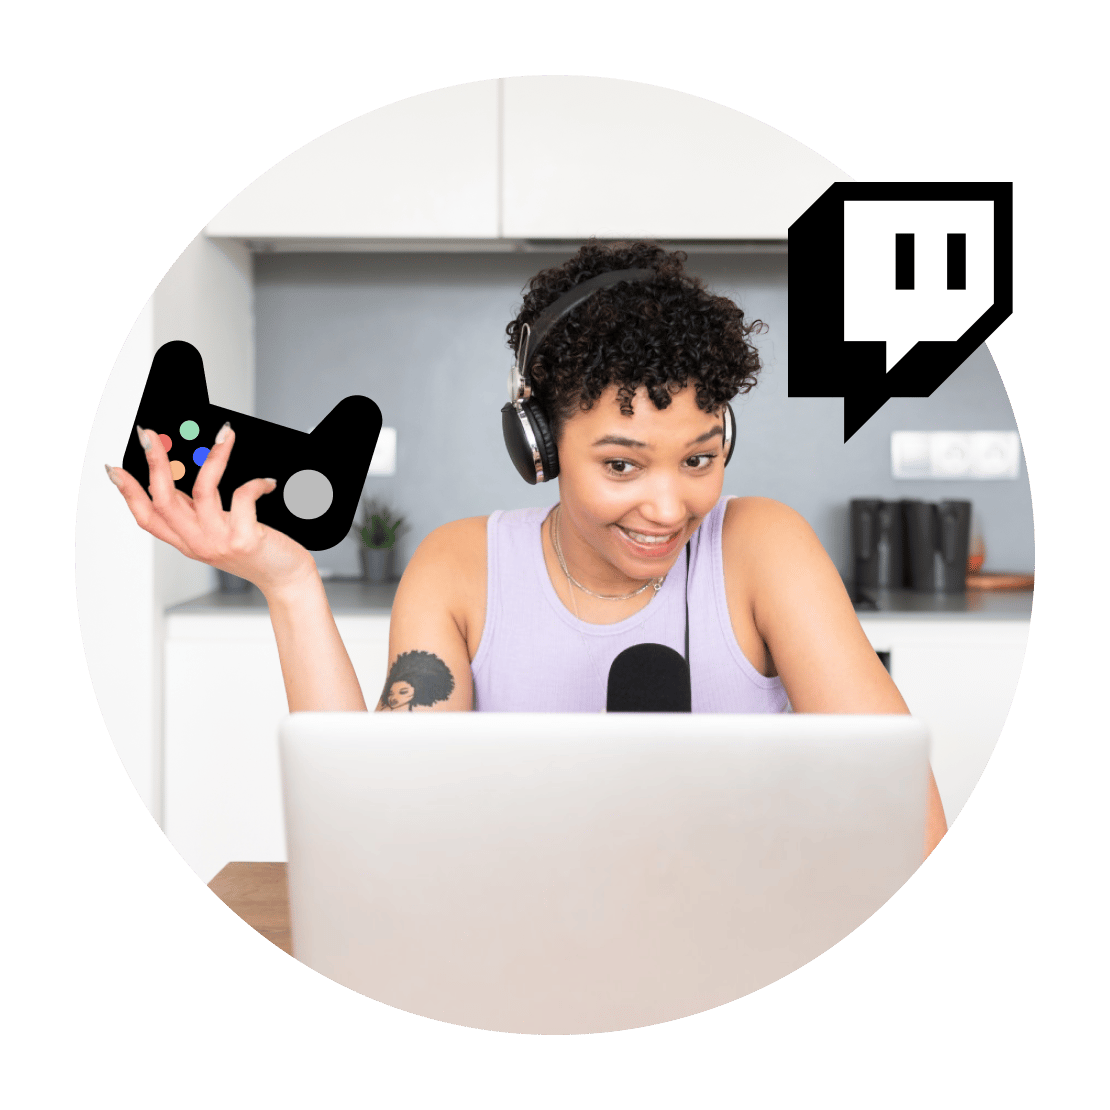 A woman using a VPN for gaming on Twitch.